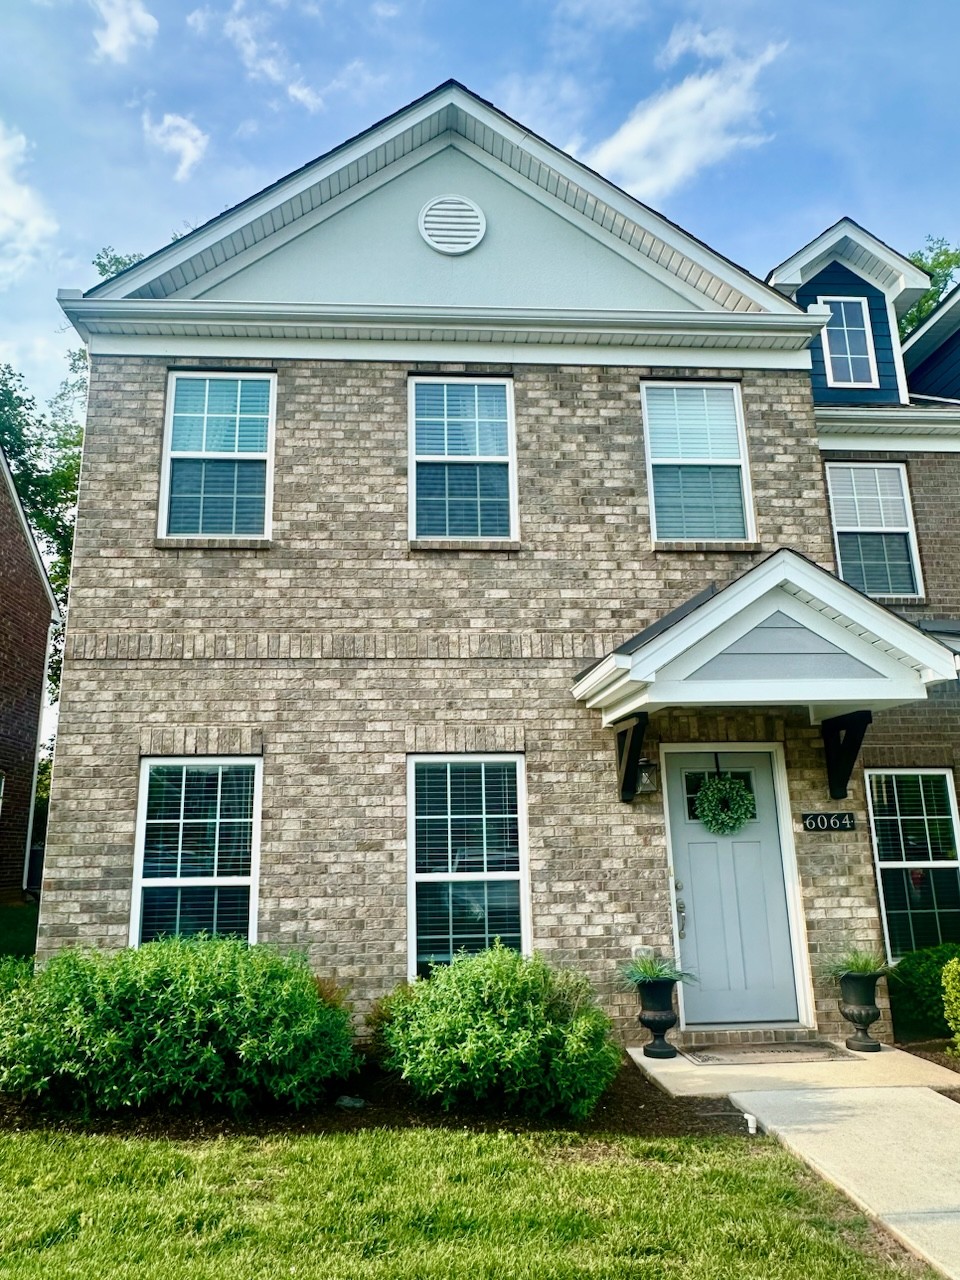 View Hendersonville, TN 37075 townhome